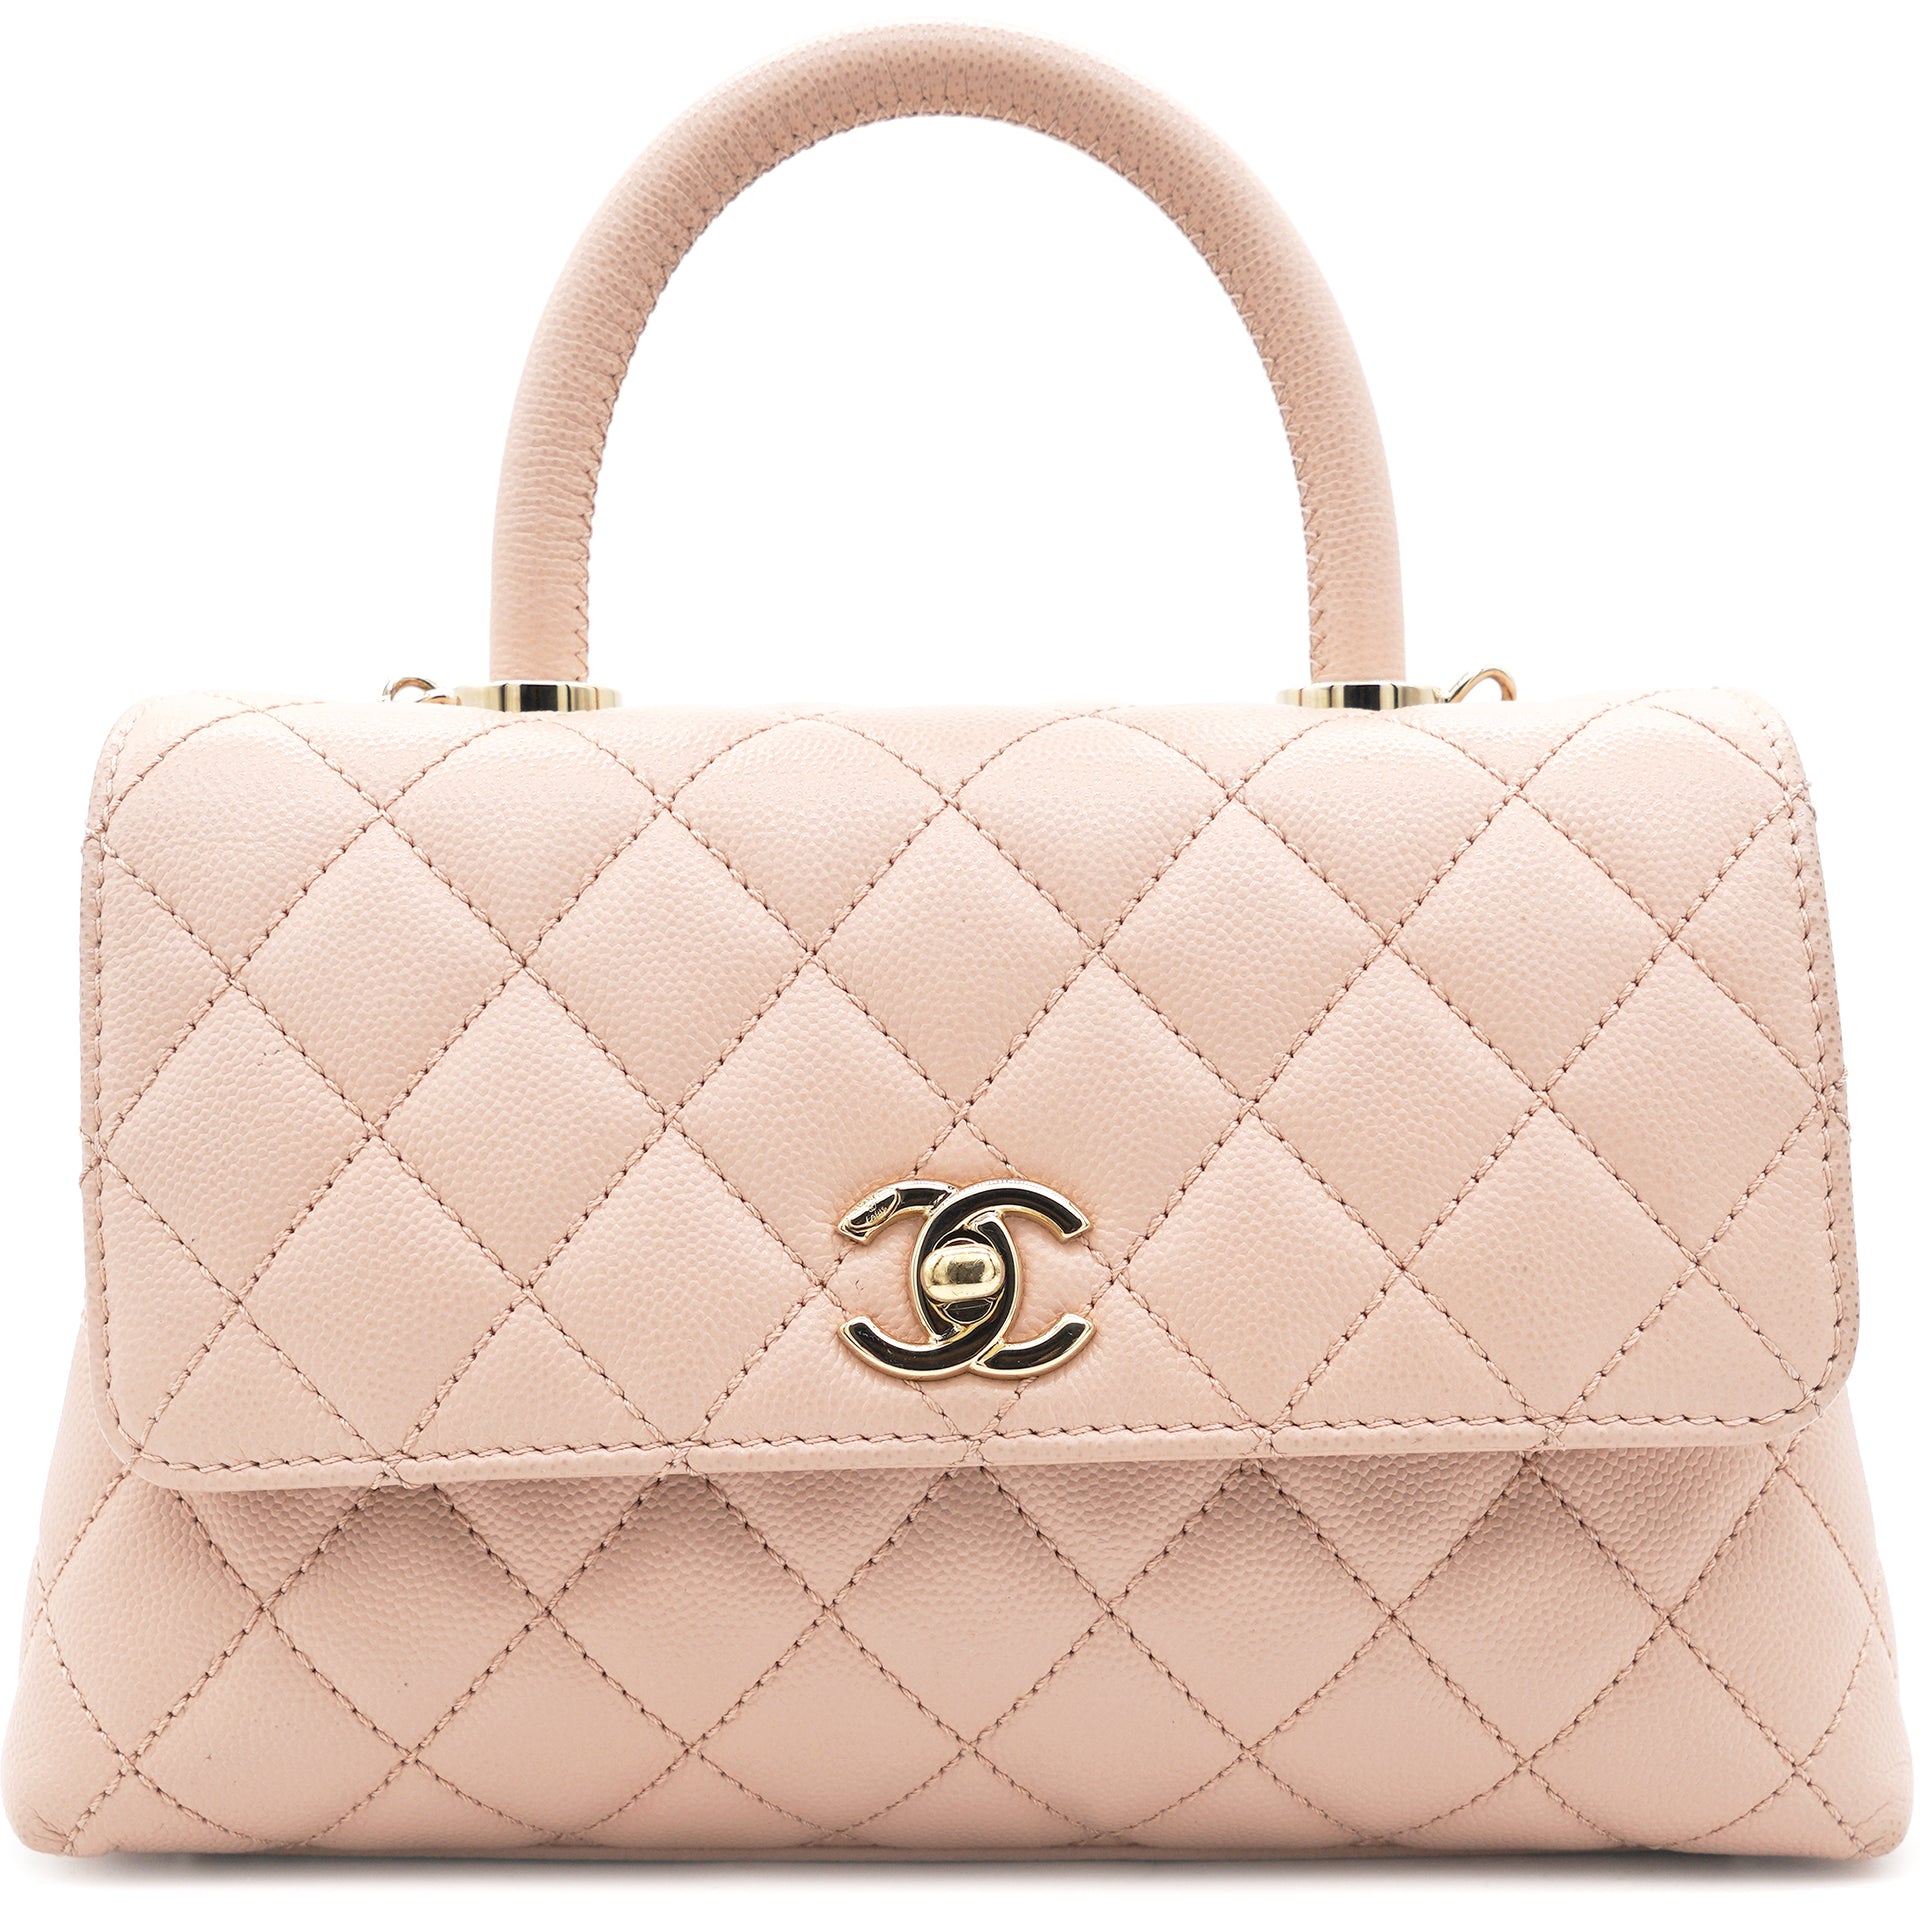 Chanel Gold Quilted Caviar Leather Small Coco Top Handle Bag Chanel